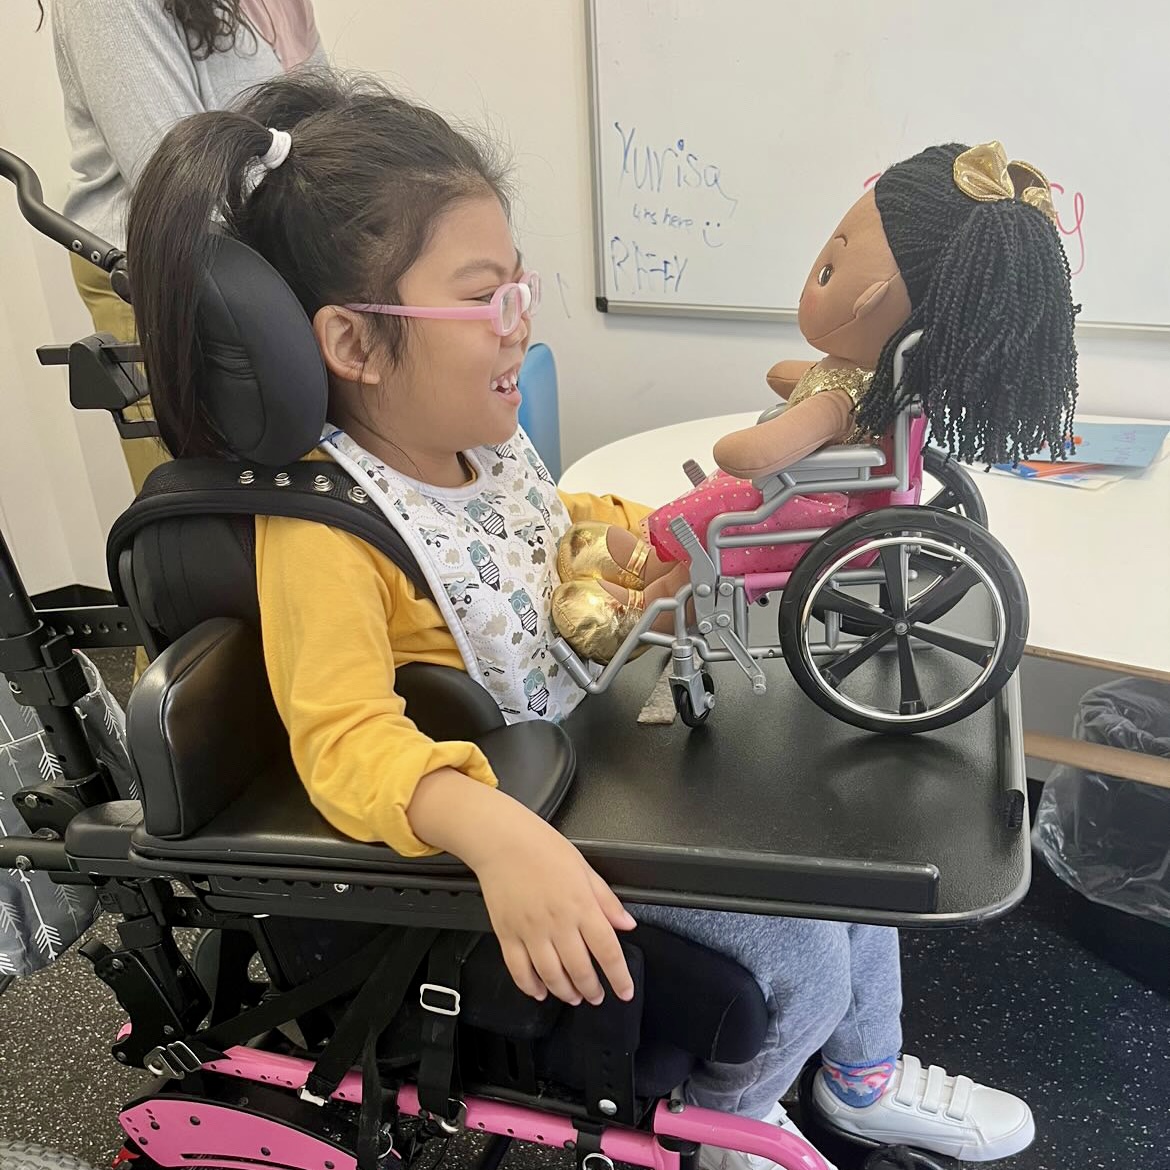 Ellie practices using motor skills such as reaching and grasping dolls during an occupational therapy session with her therapist!

#iBRAIN #PretendPlay #BrainBasedDisorders #BrainInjury #OT #OTGoals #Accessibility #Disability 
#iBrainAcademy #iBrainInstitute #iBrainCenter